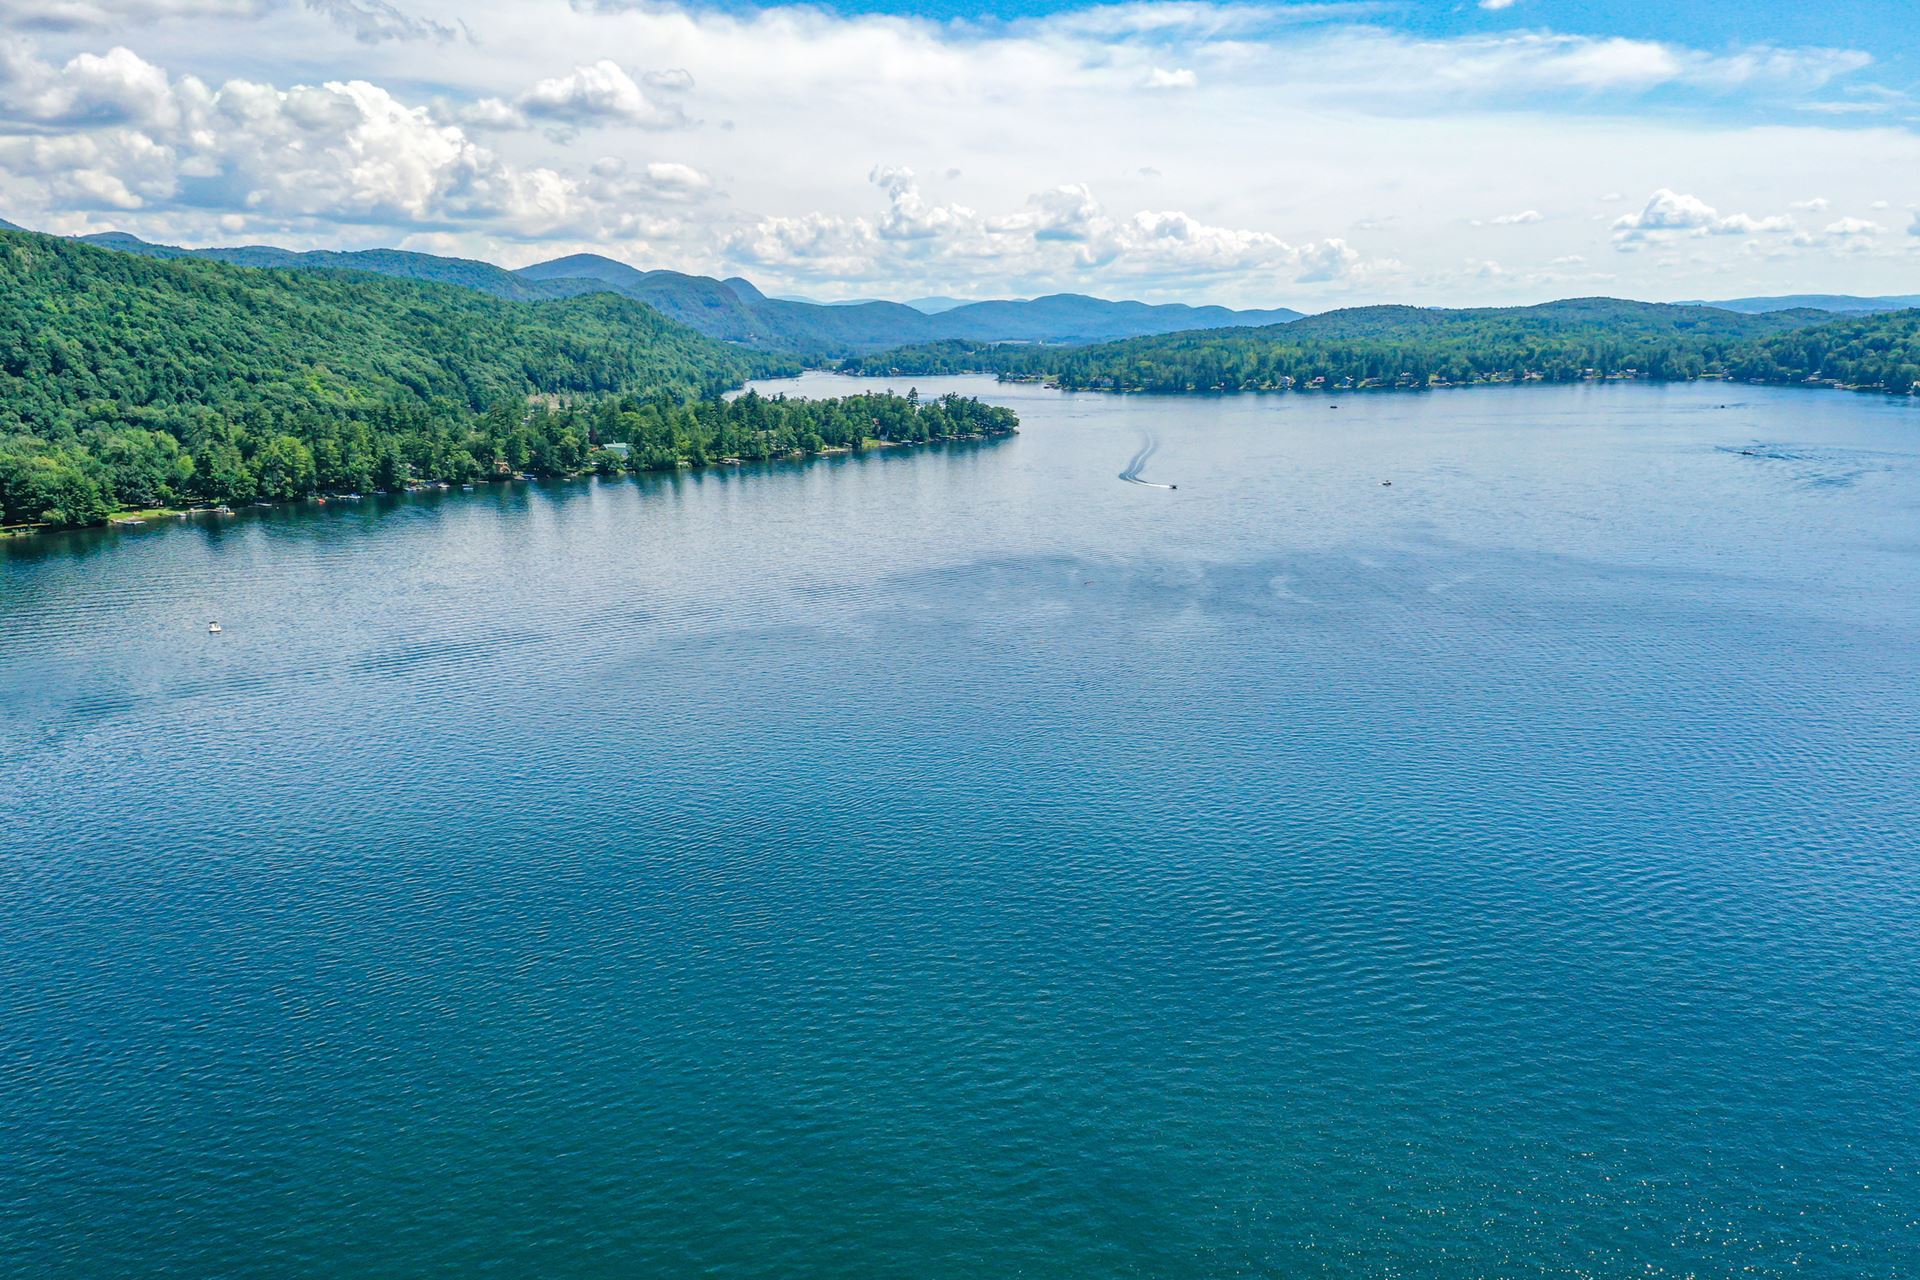 Arial view of Lake St. Catherine, looking south towards Wells, VT.